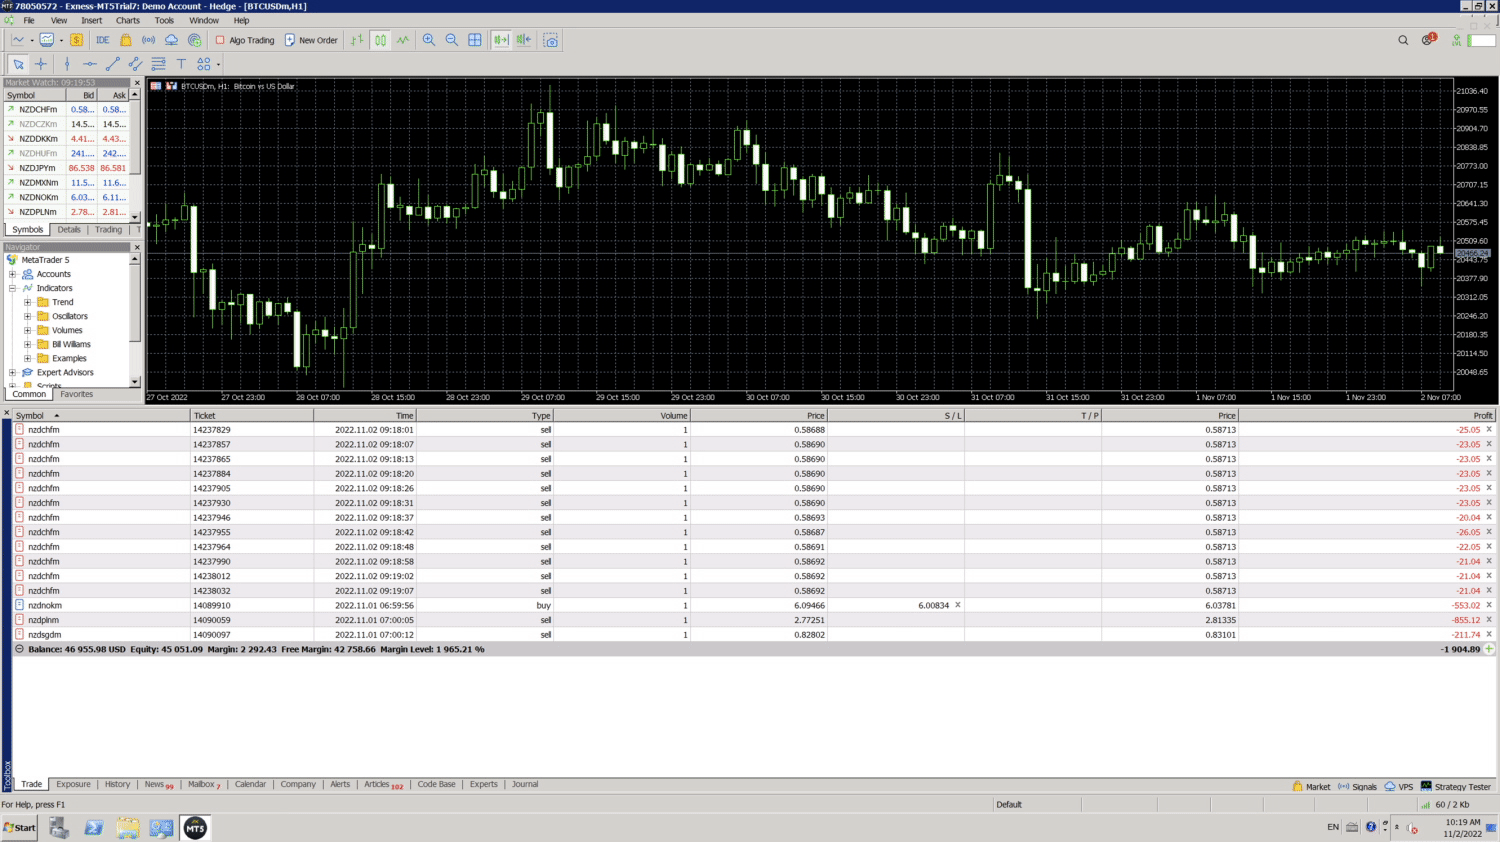 CSVP_4562_How_to_set_up_and_modify_Stop_Loss_and_Take_Profit__MT5_Desktop_Terminal-_Active_order__EN_resized.gif